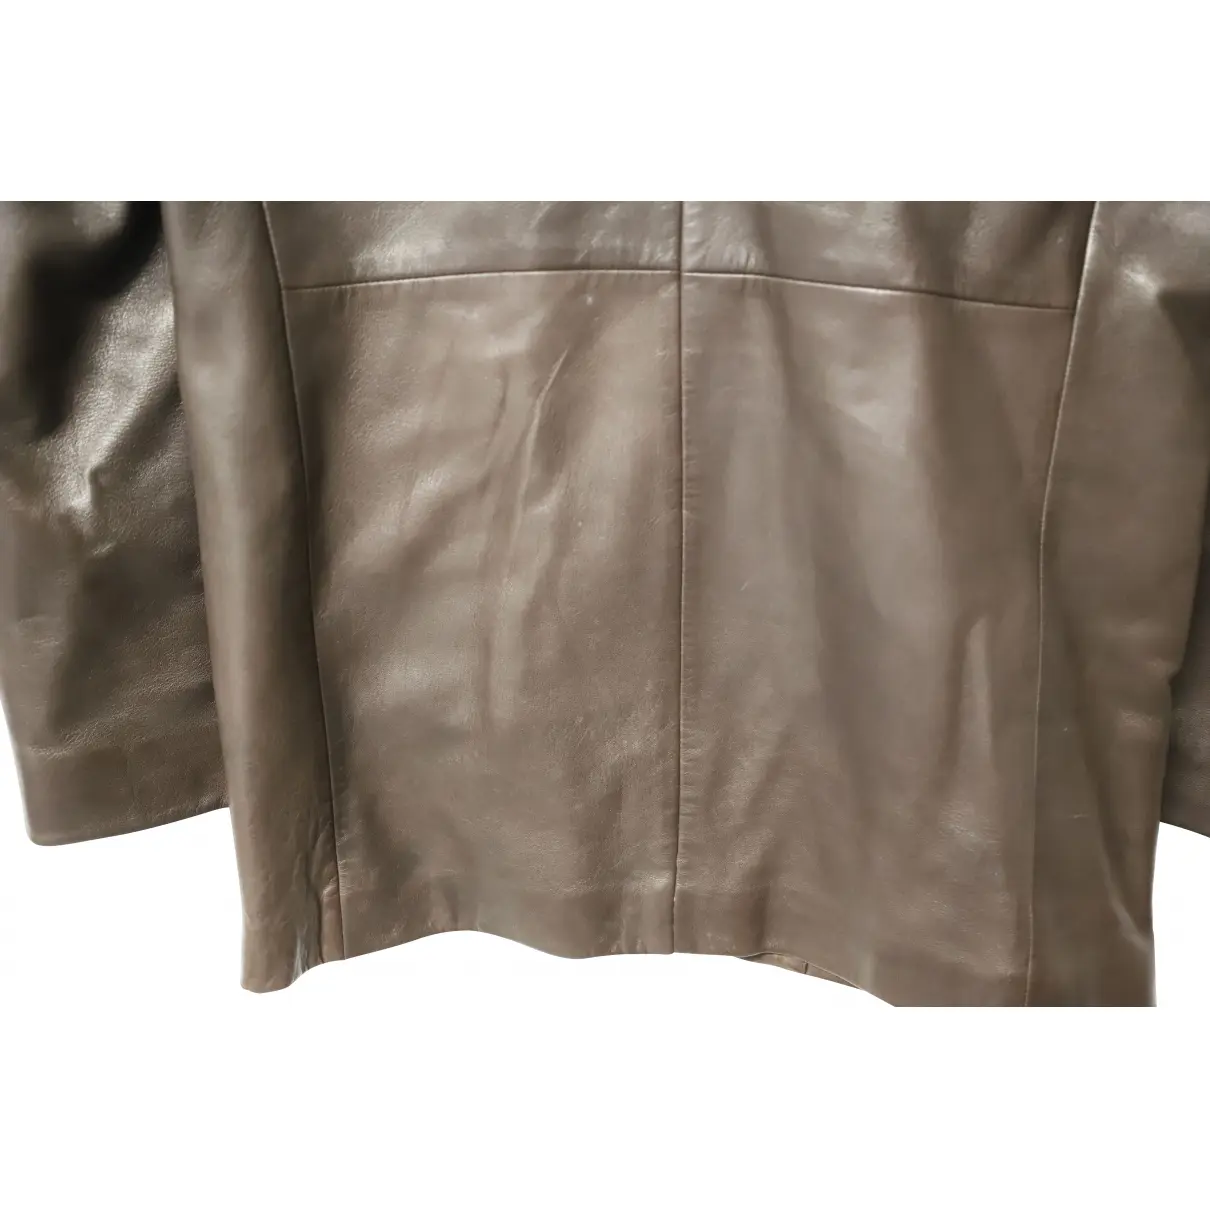 Leather jacket Calvin Klein Collection